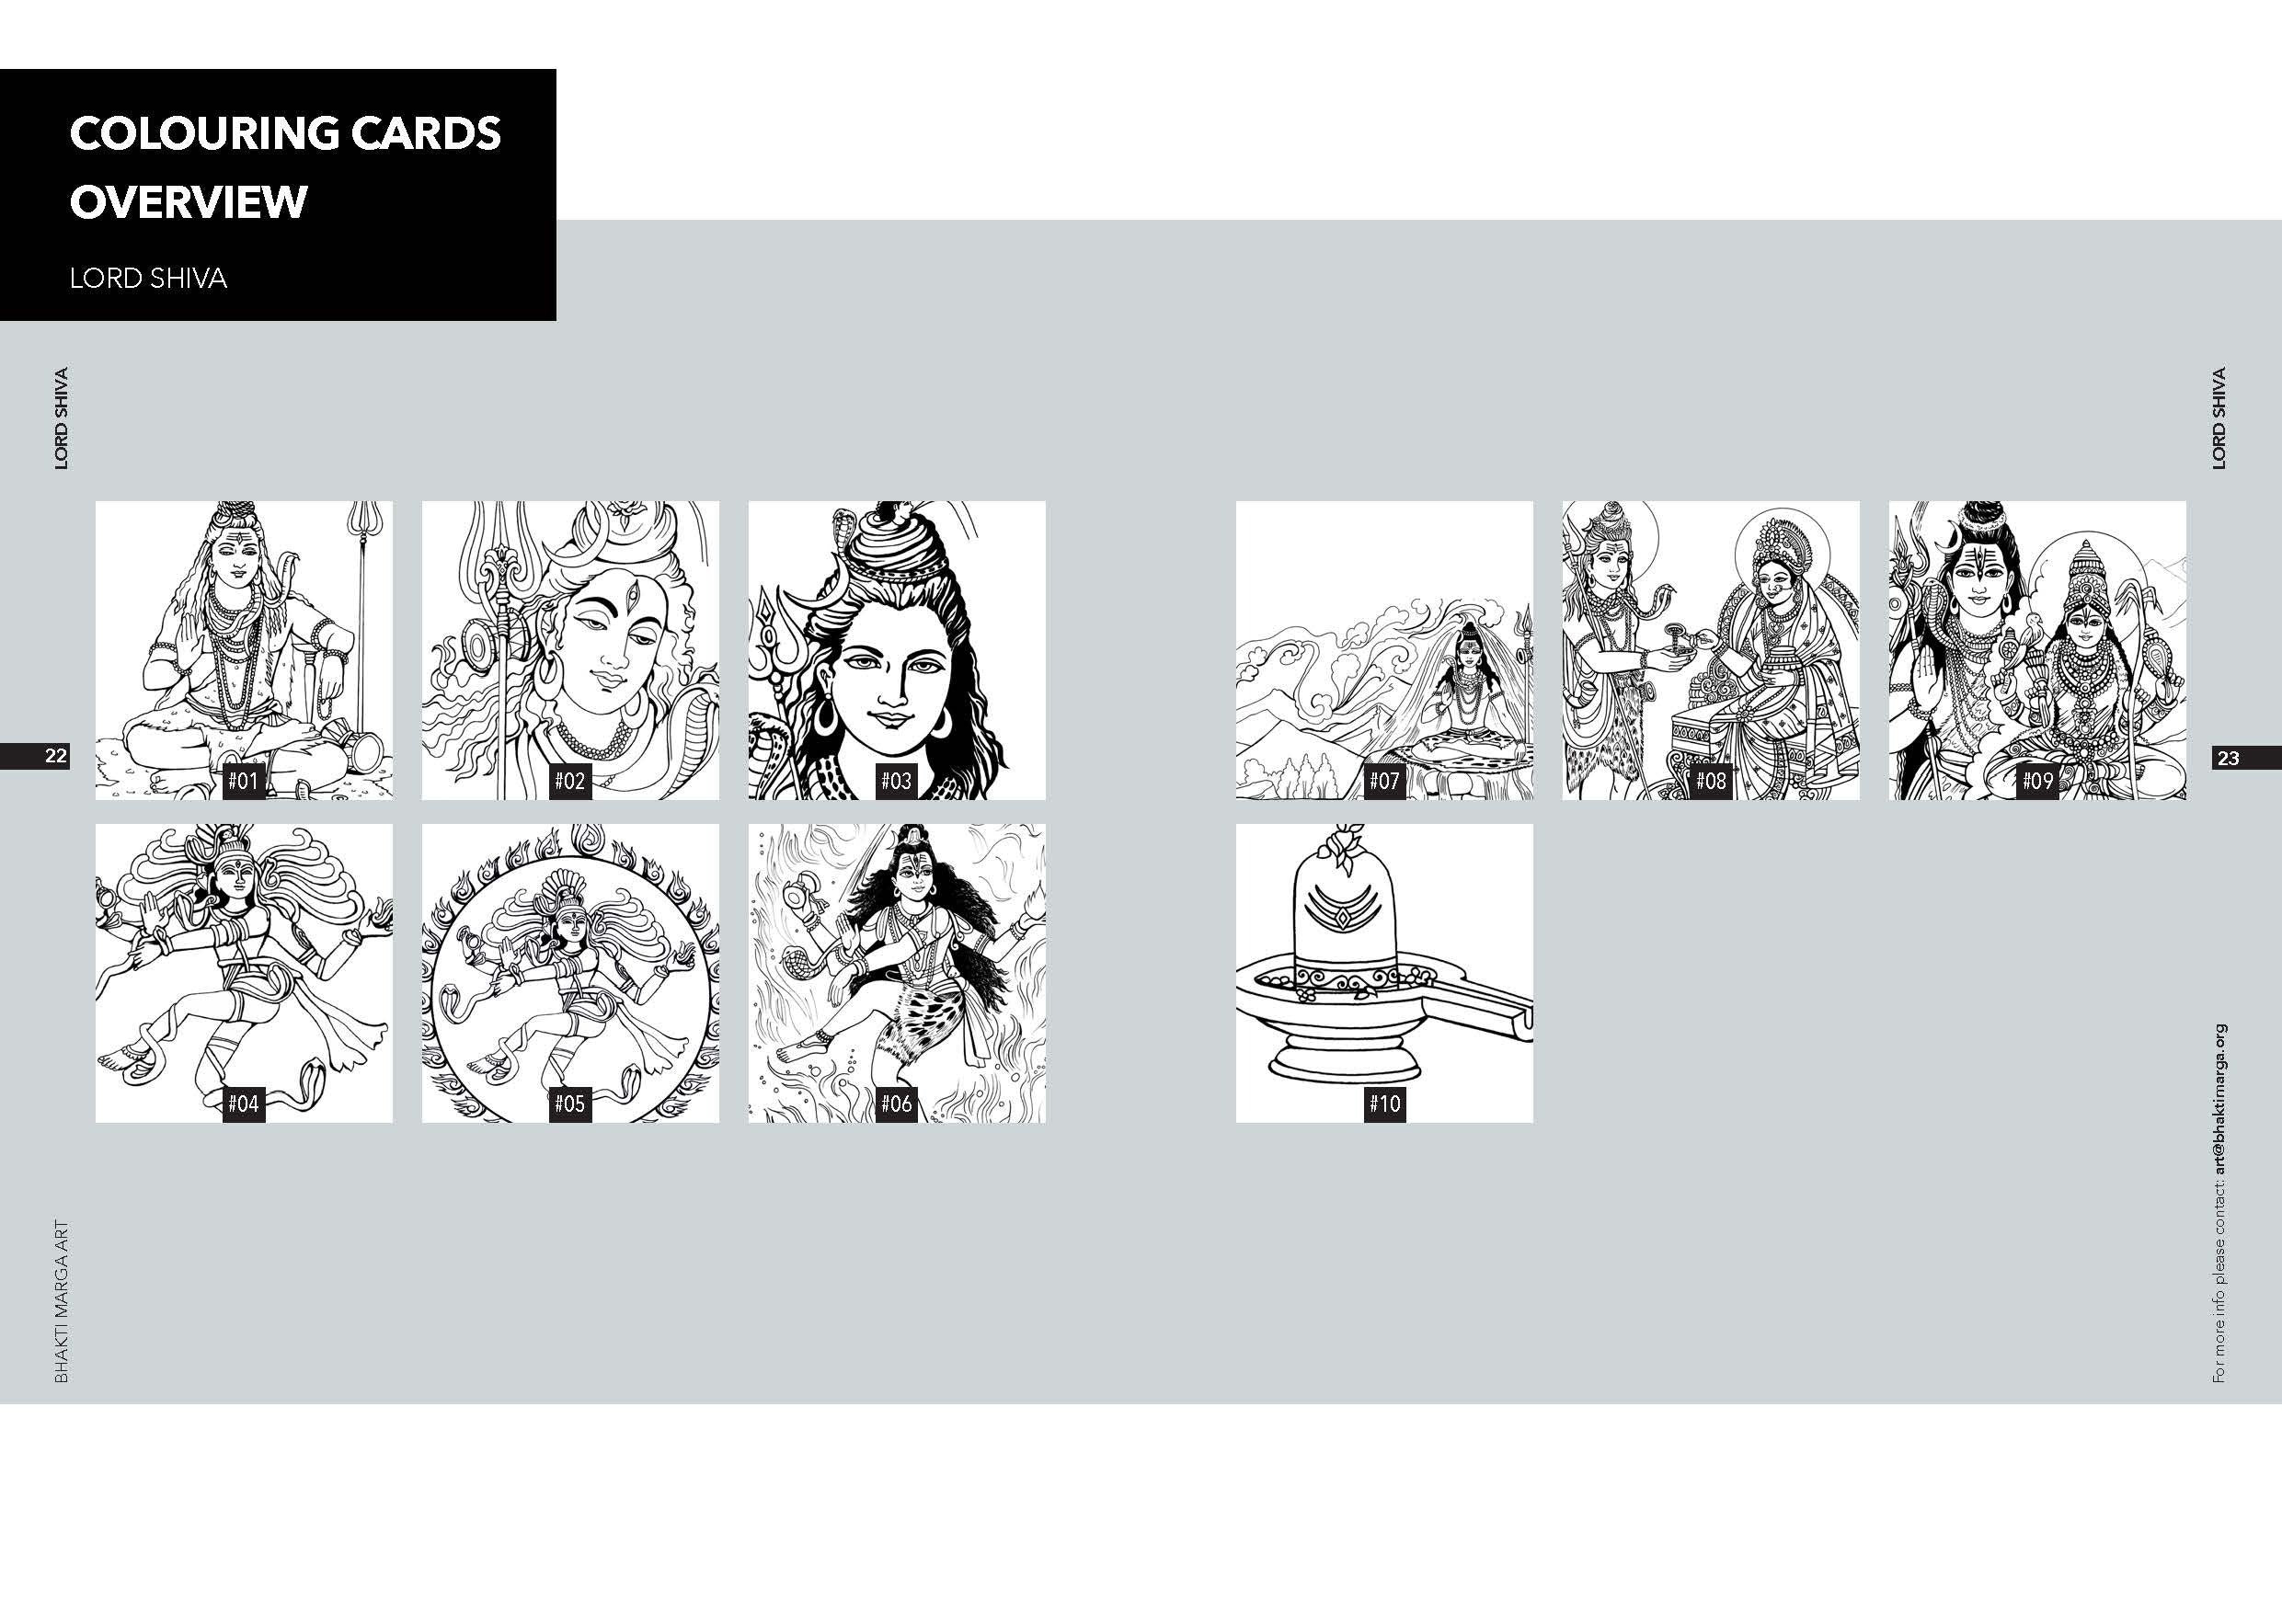 Colouring Cards 'LORD SHIVA'